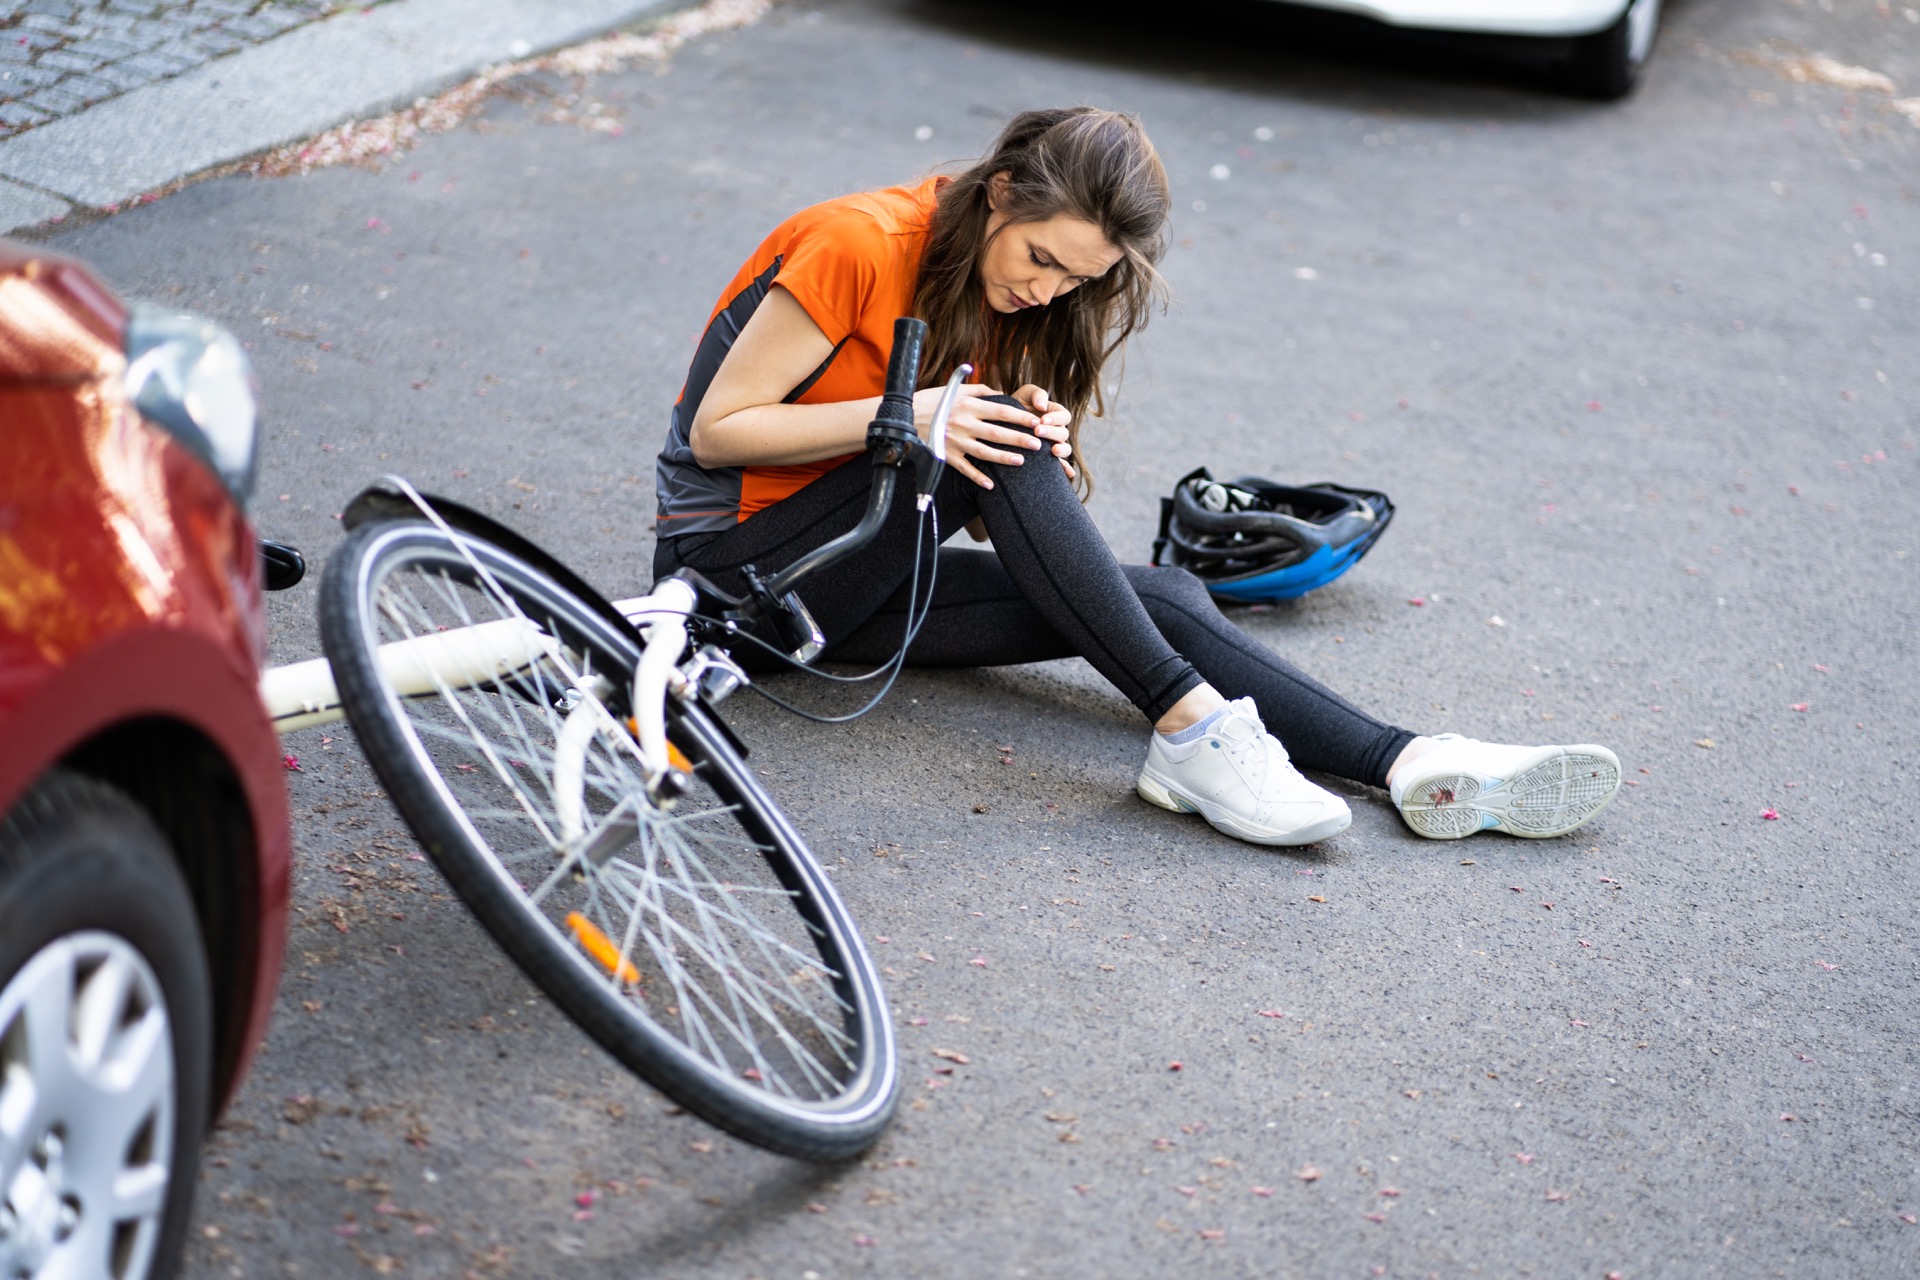 Bicycle Accident Insurance Investigation in Florida